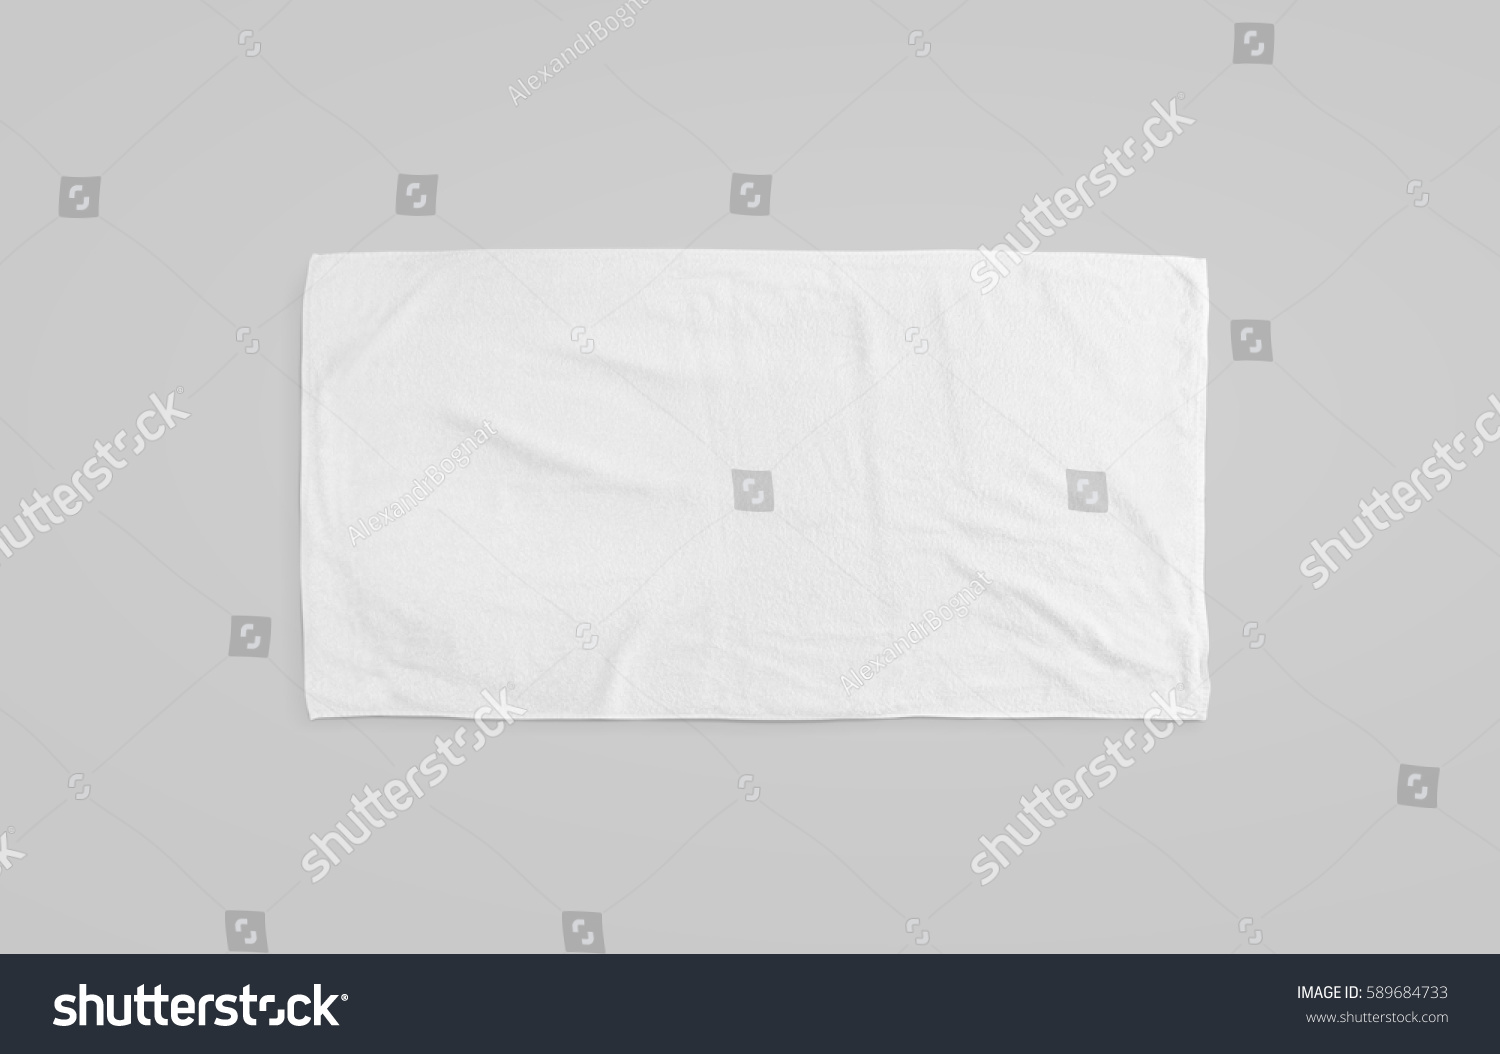 Black white soft beach towel mockup. Clear unfolded wiper mock up laying on the floor. Shaggy fur bath textured jack-towel top view. Domestic cloth kitchen overlay template ready for print.. #589684733